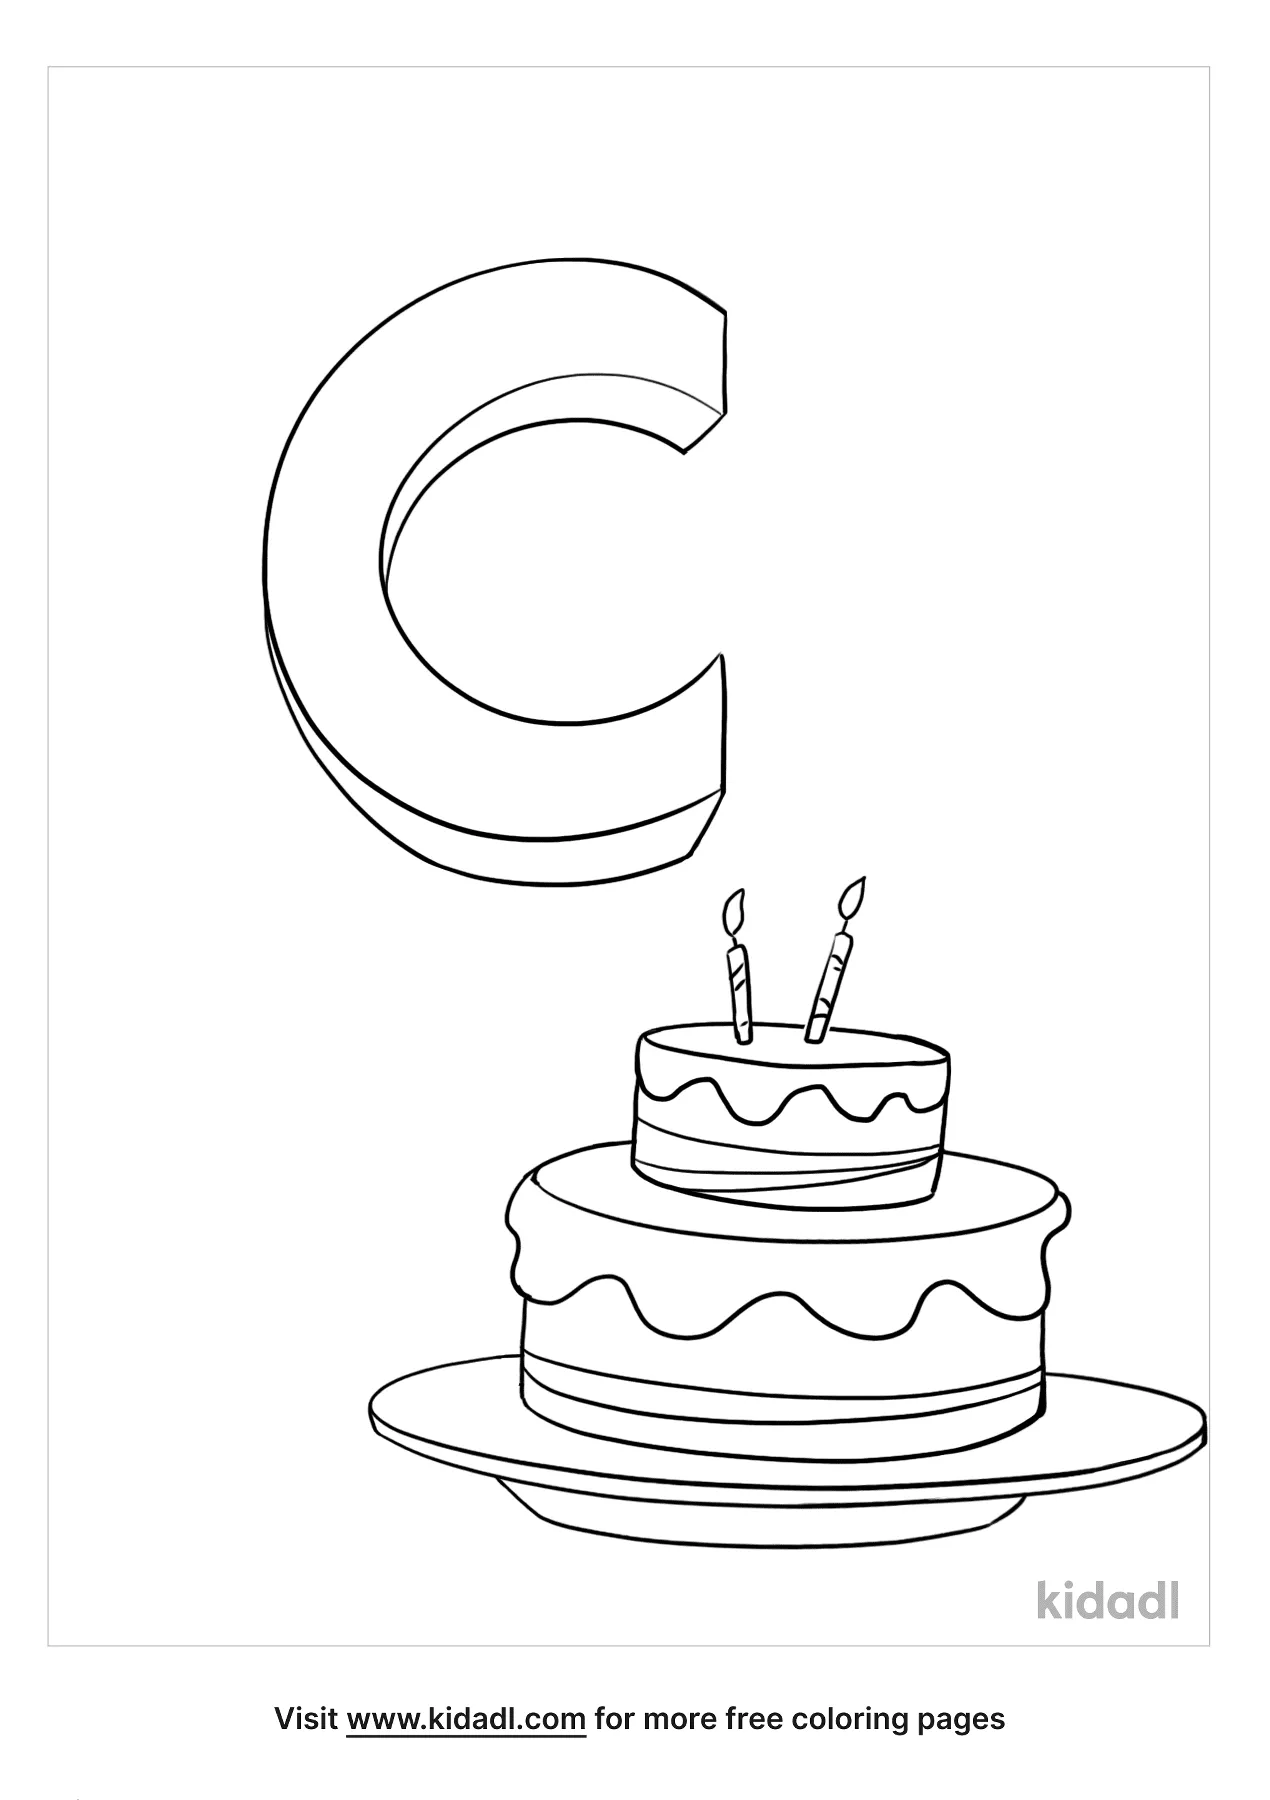 free-letter-c-coloring-page-coloring-page-printables-kidadl